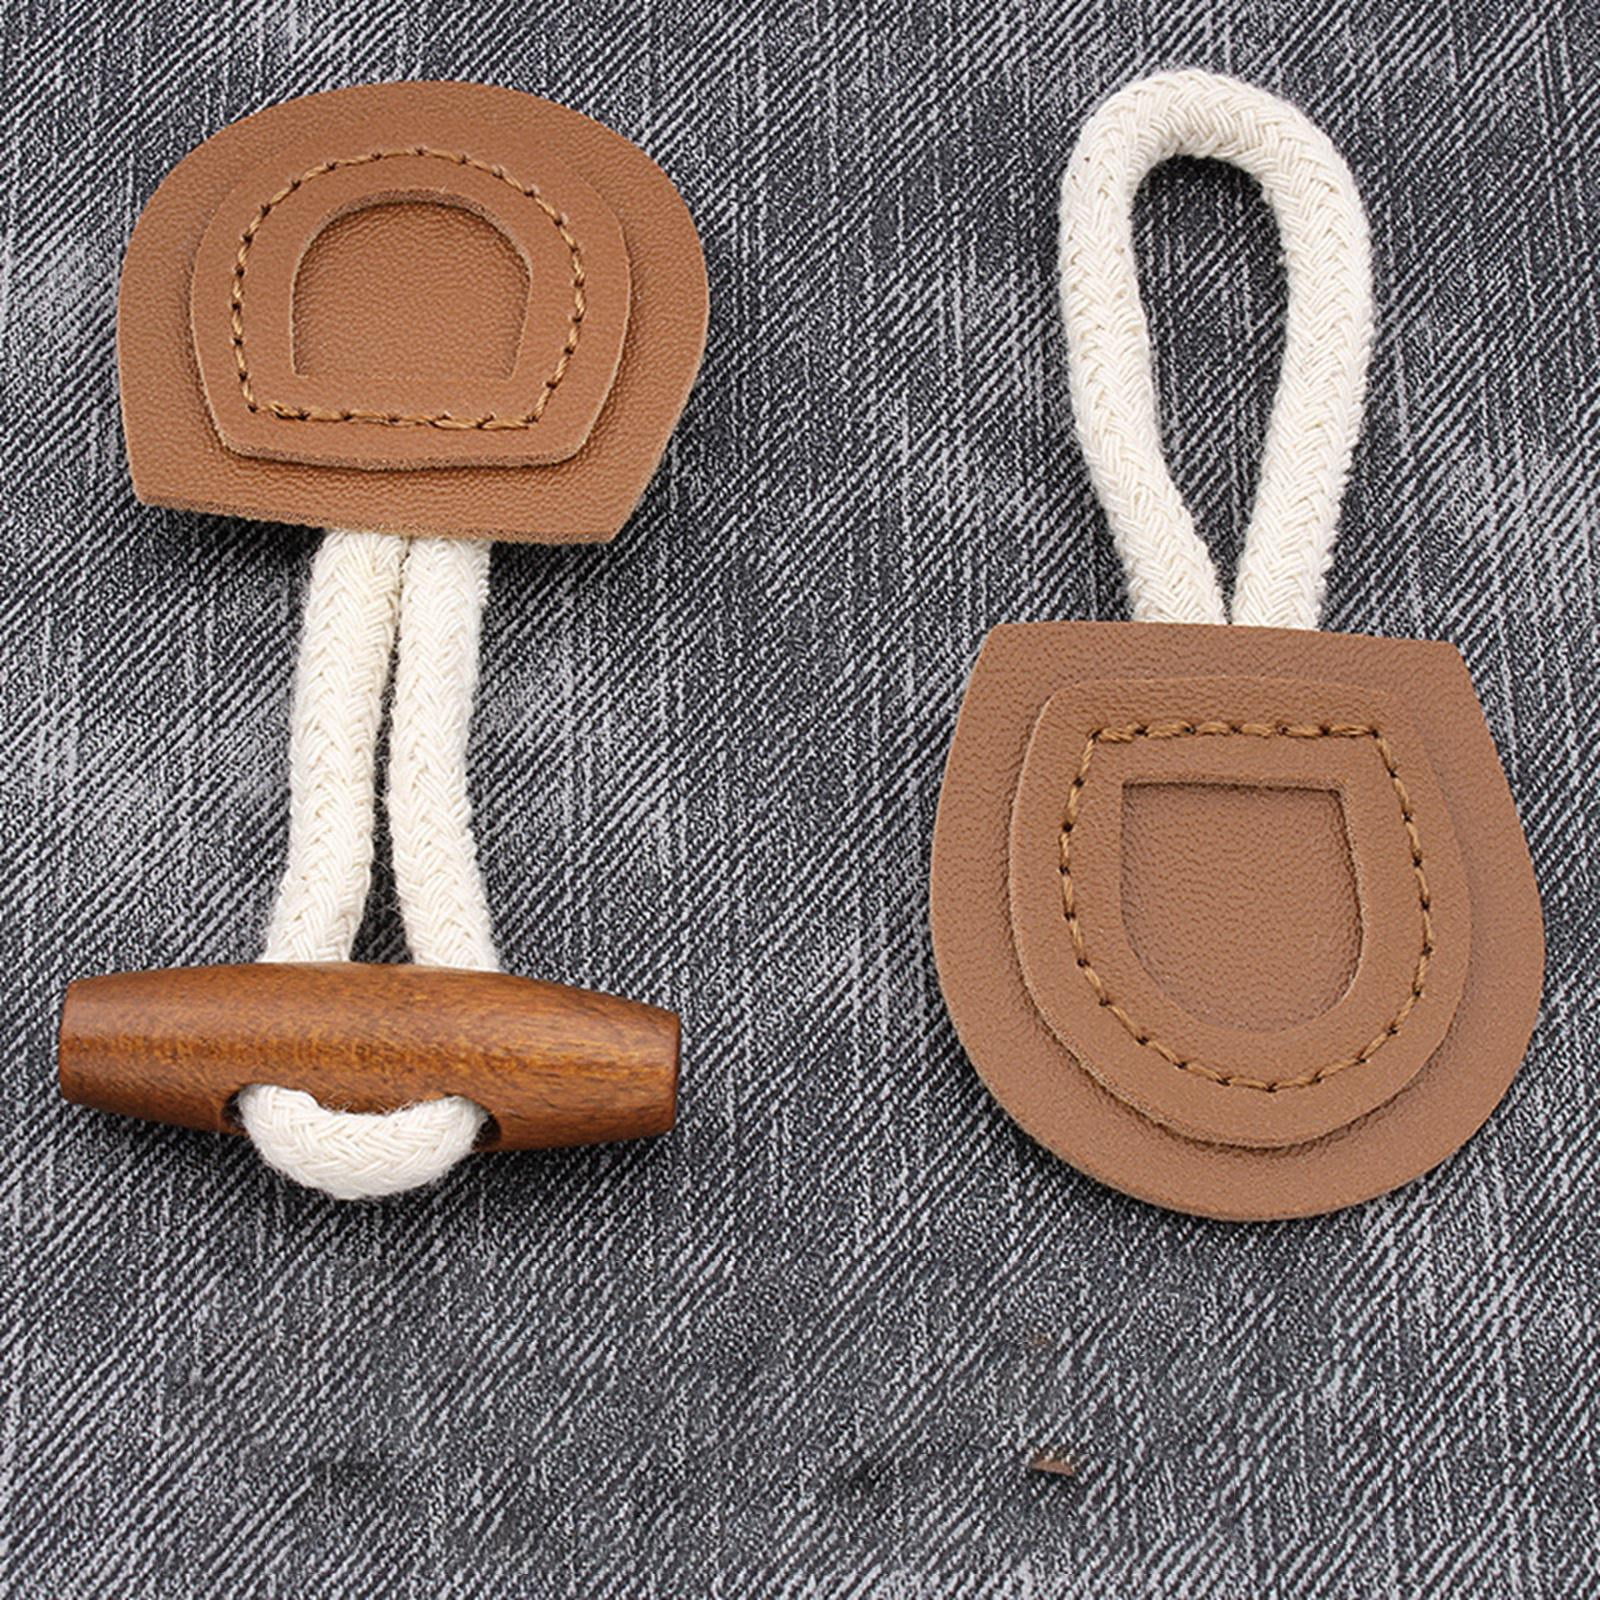 Bargain Deals On Wholesale leather toggle button For DIY Crafts